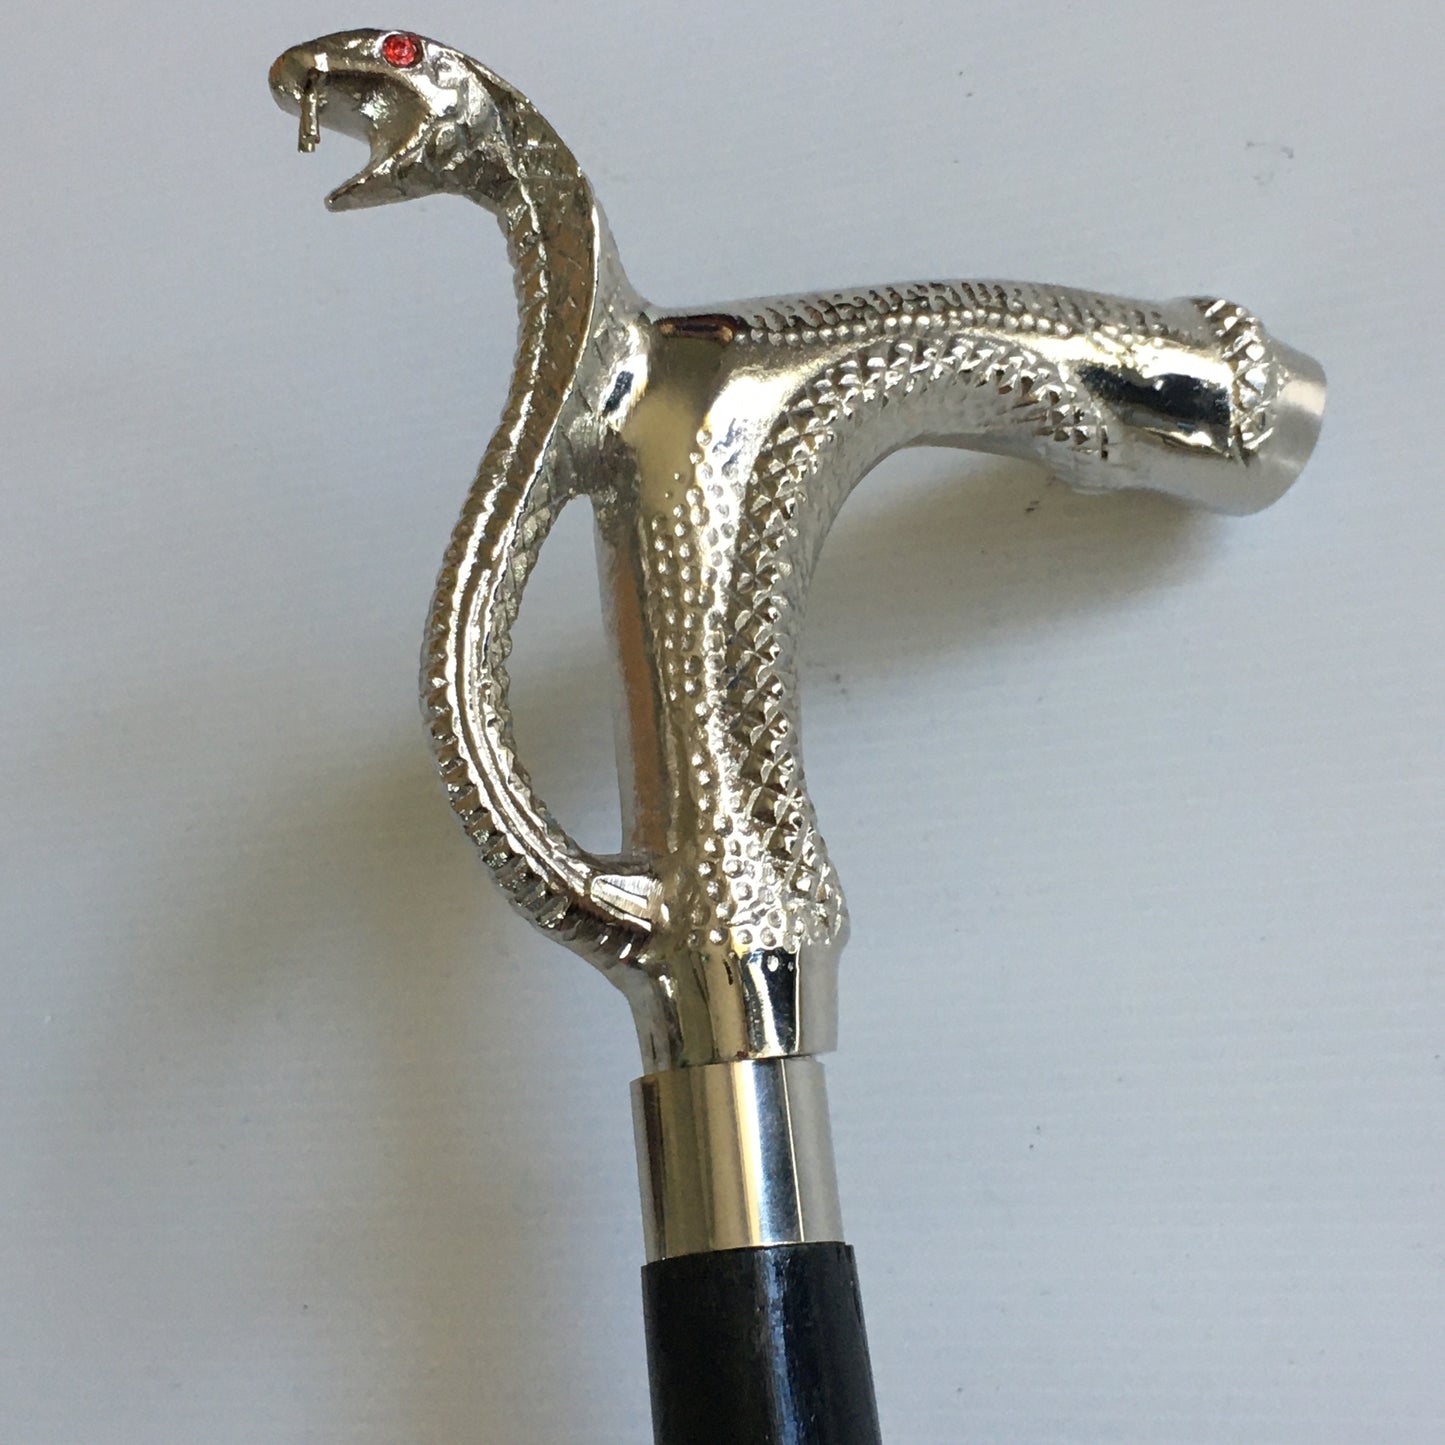 Walking Stick with Silver Snakes Head Handle on a black stick